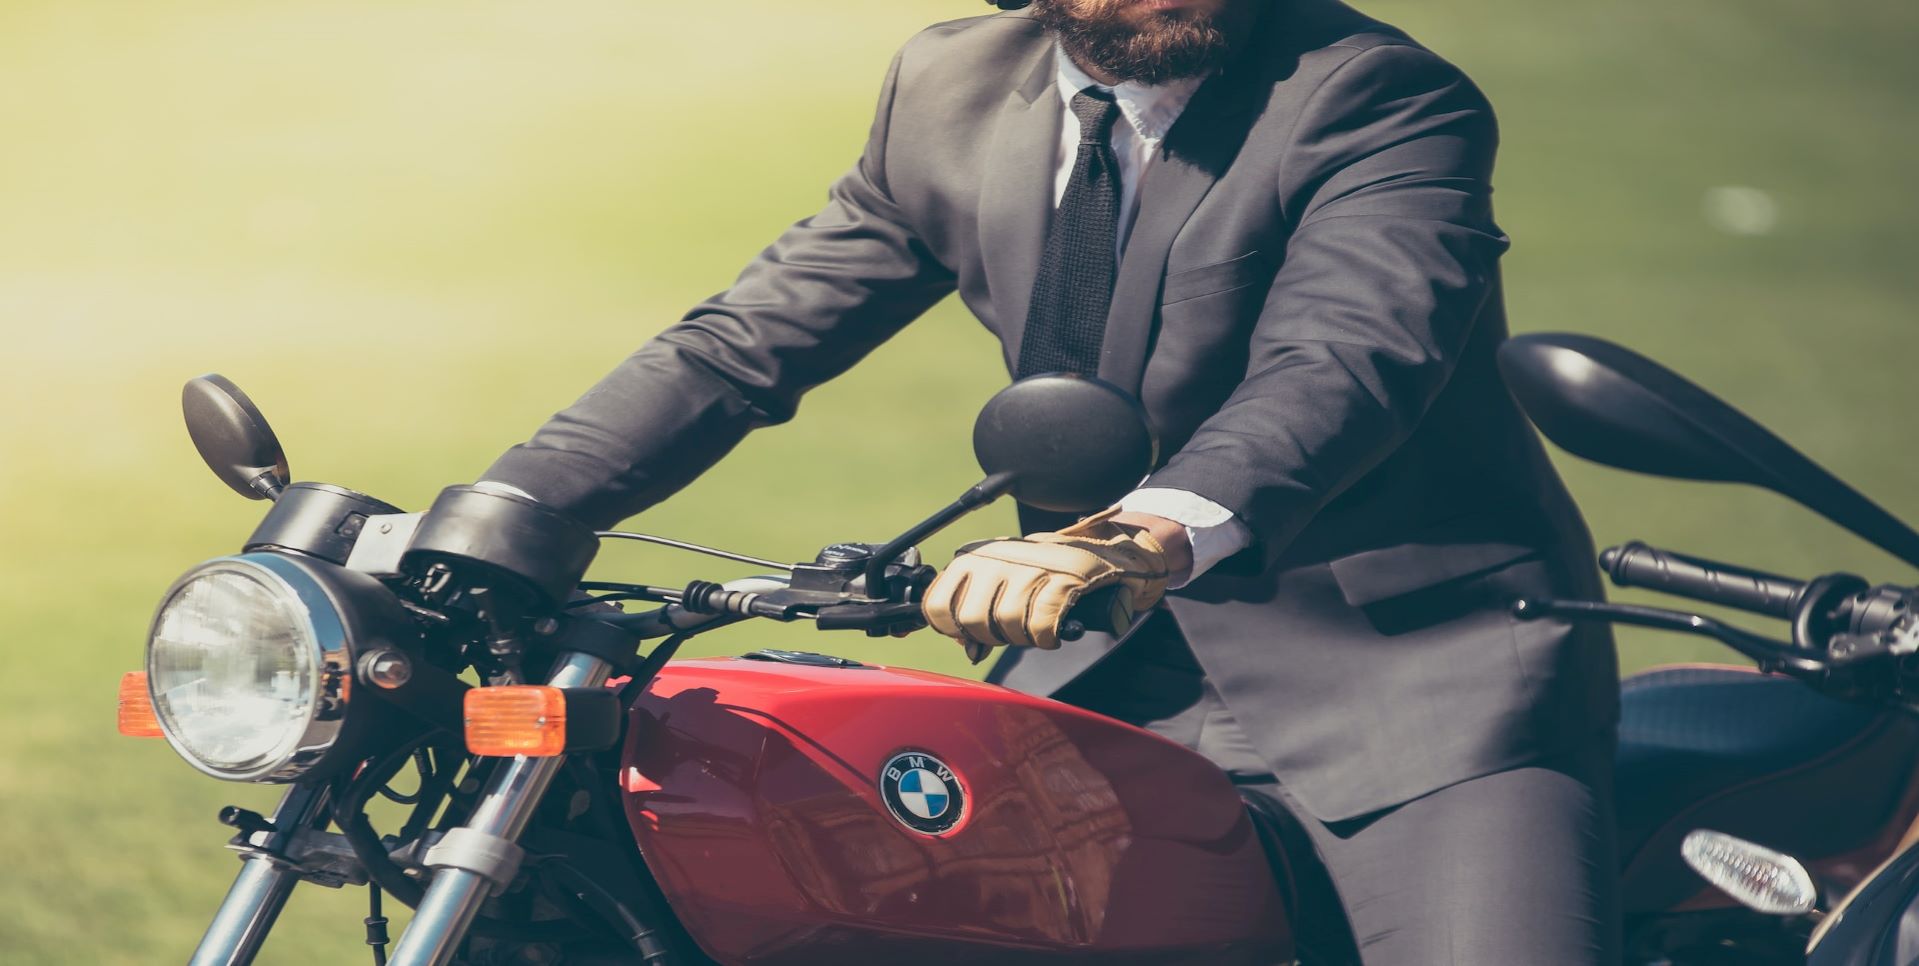 Man in suit on red motorcycle.